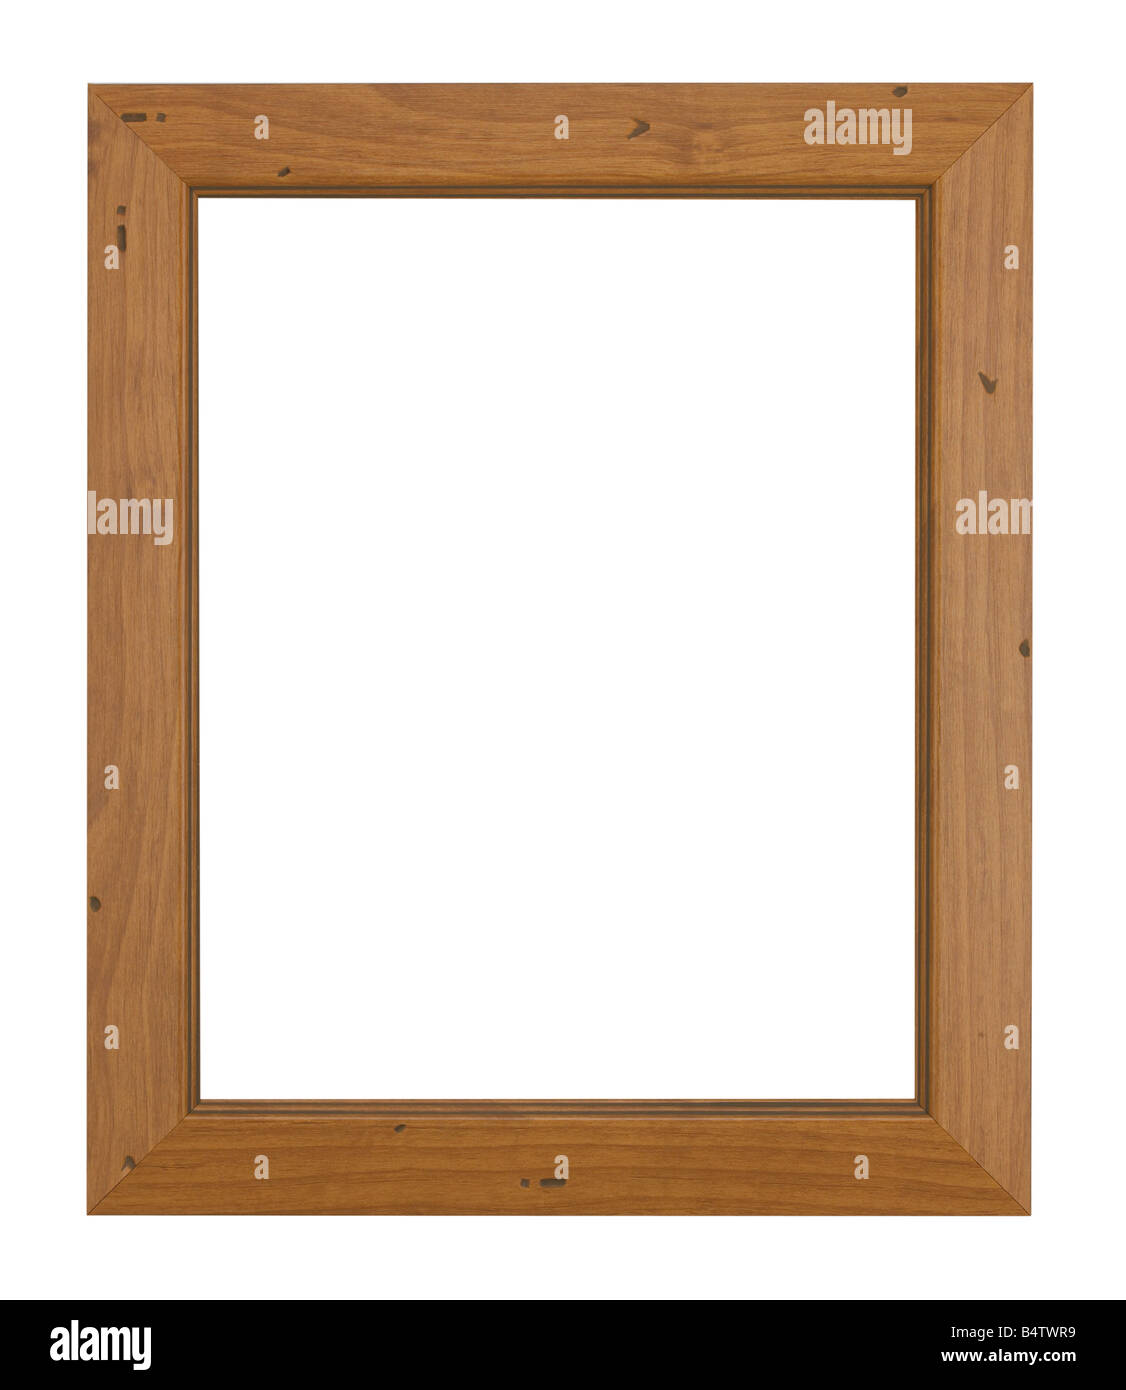 BROWN WOOD PICTURE FRAME Stock Photo